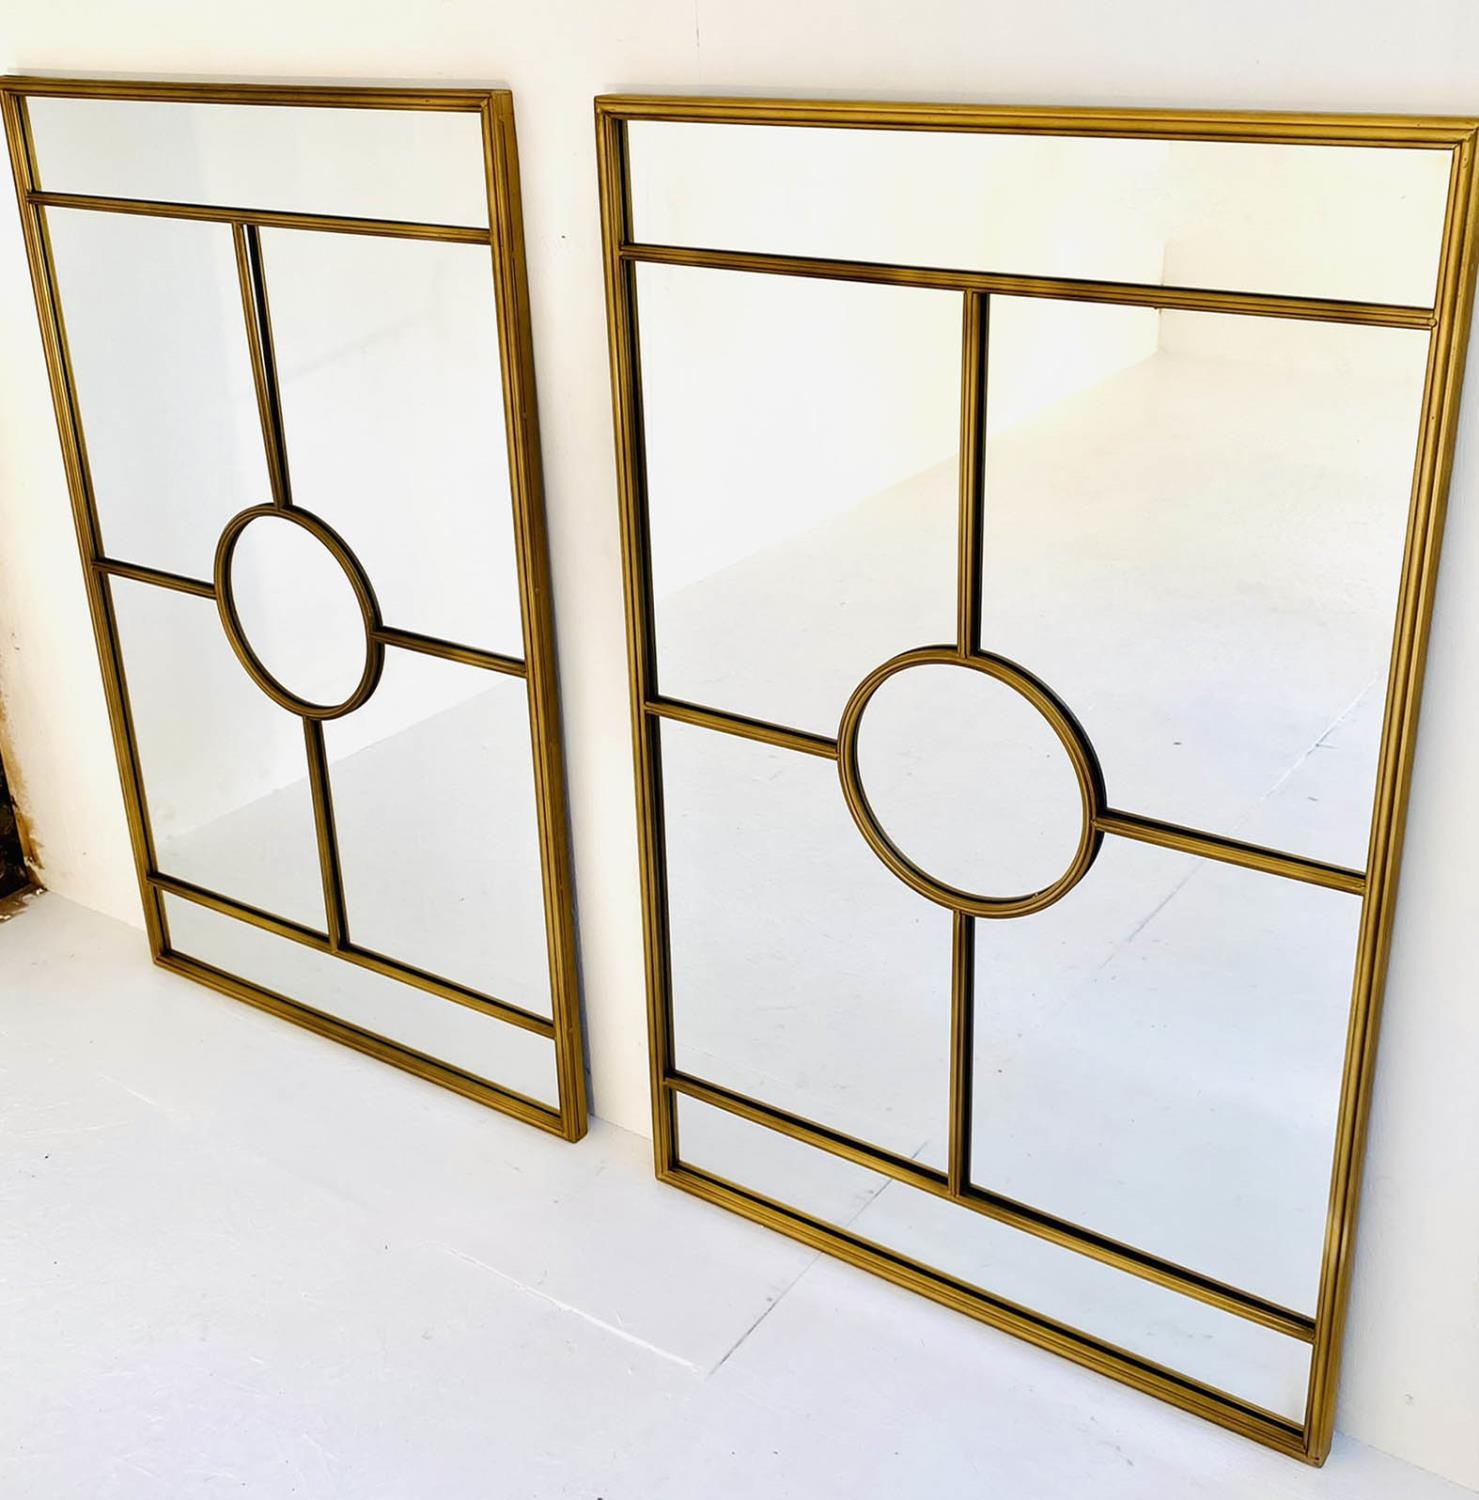 ARCHITECTURAL WALL MIRRORS, a pair, 110cm x 70cm, gilt metal frames, 1950s French style. (2)